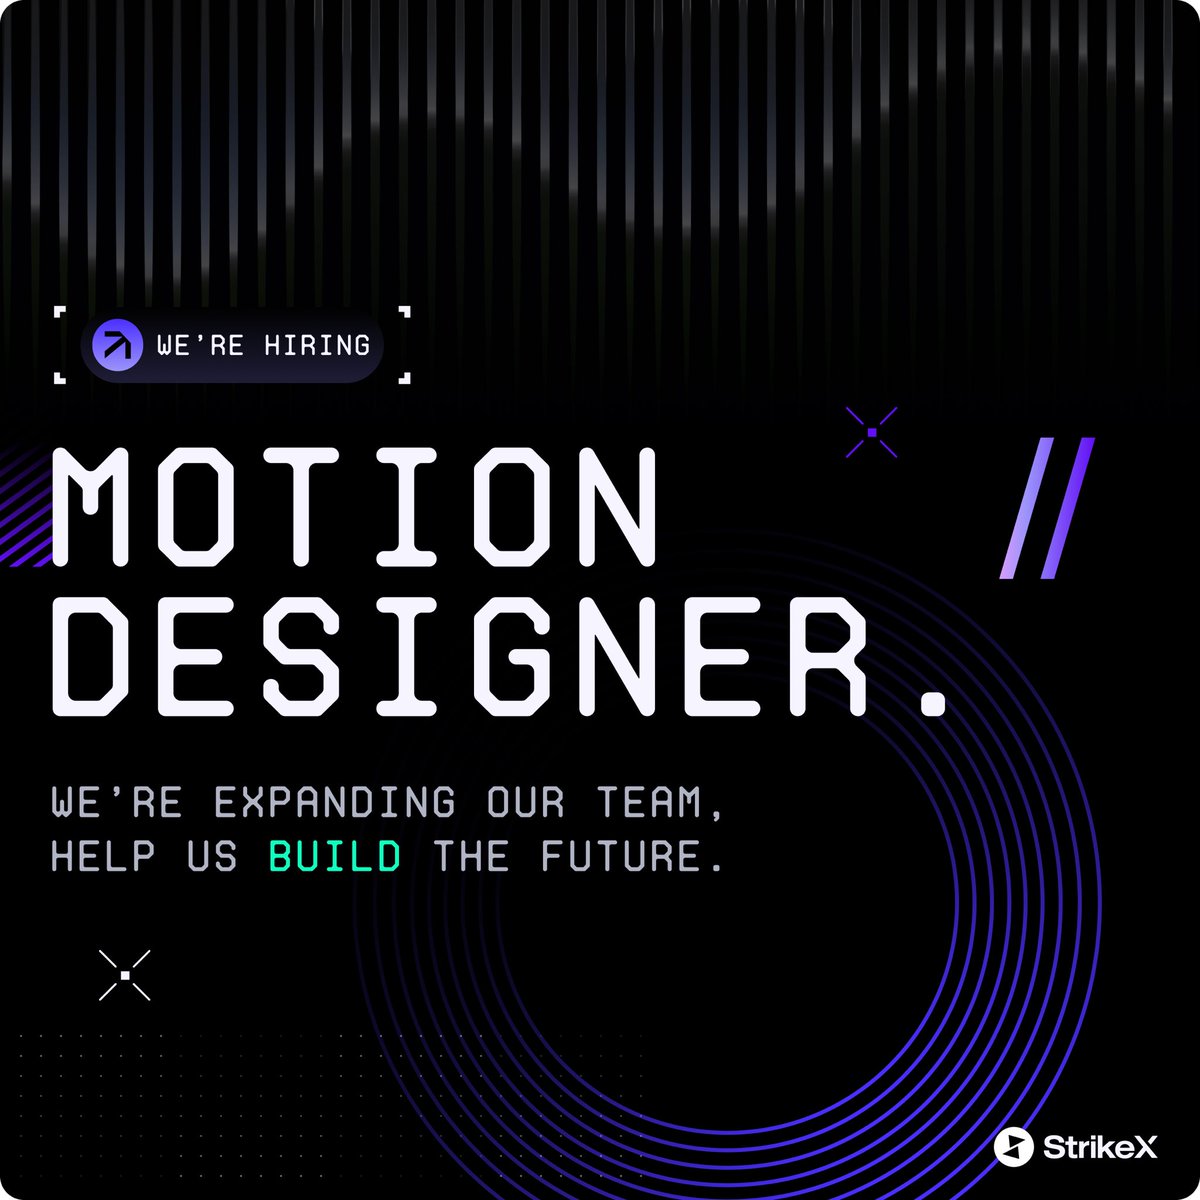 Join the #StrikeX team!⚡️

We are hiring for a Motion Designer to join our marketing team….

Got what it takes?

Follow the link to submit your application!

🔗 linkedin.com/jobs/view/3914…